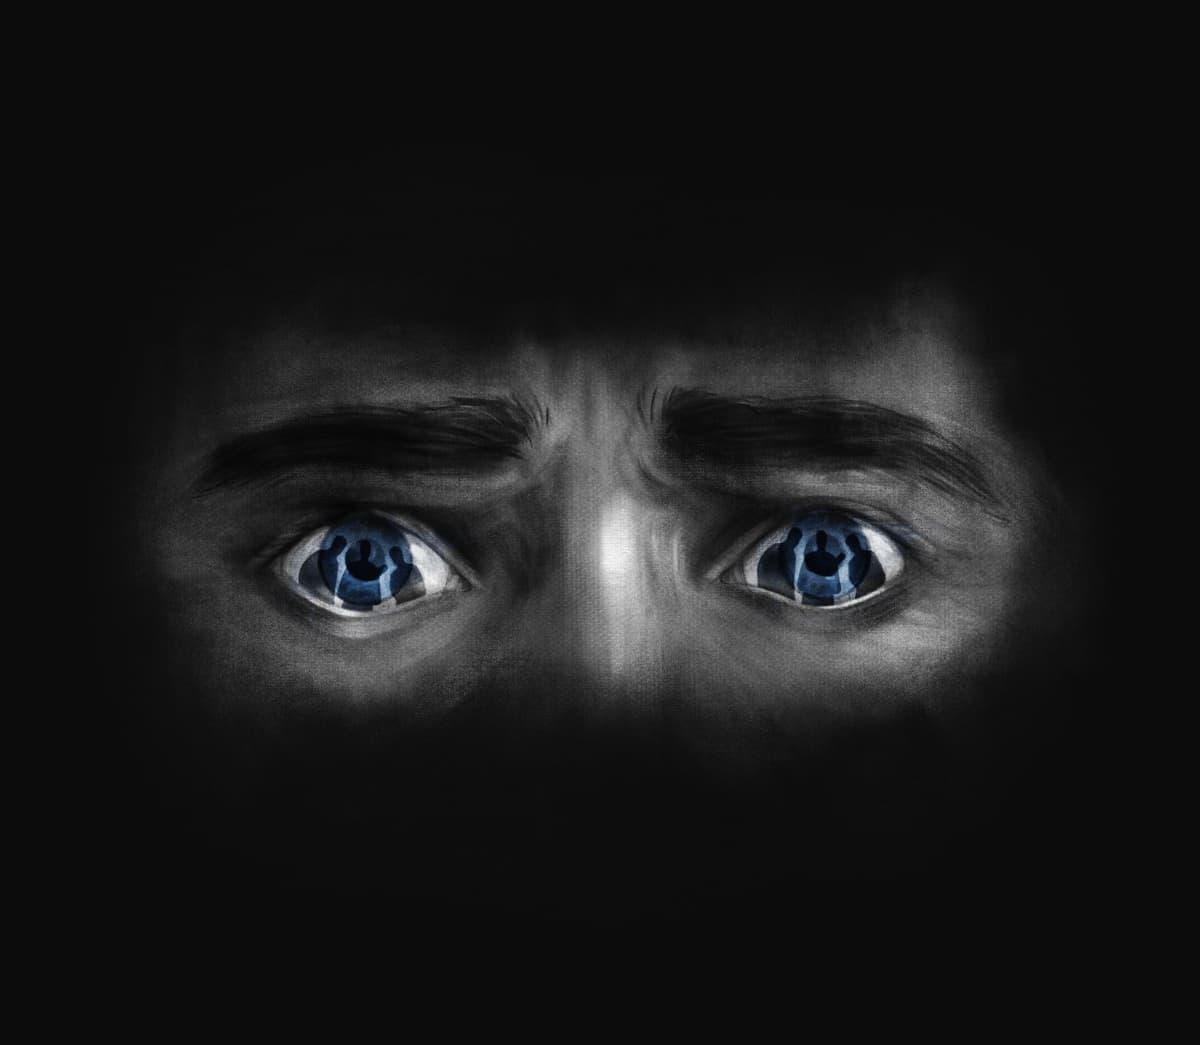 Three threatening figures are reflected in Kamran’s blue eyes.